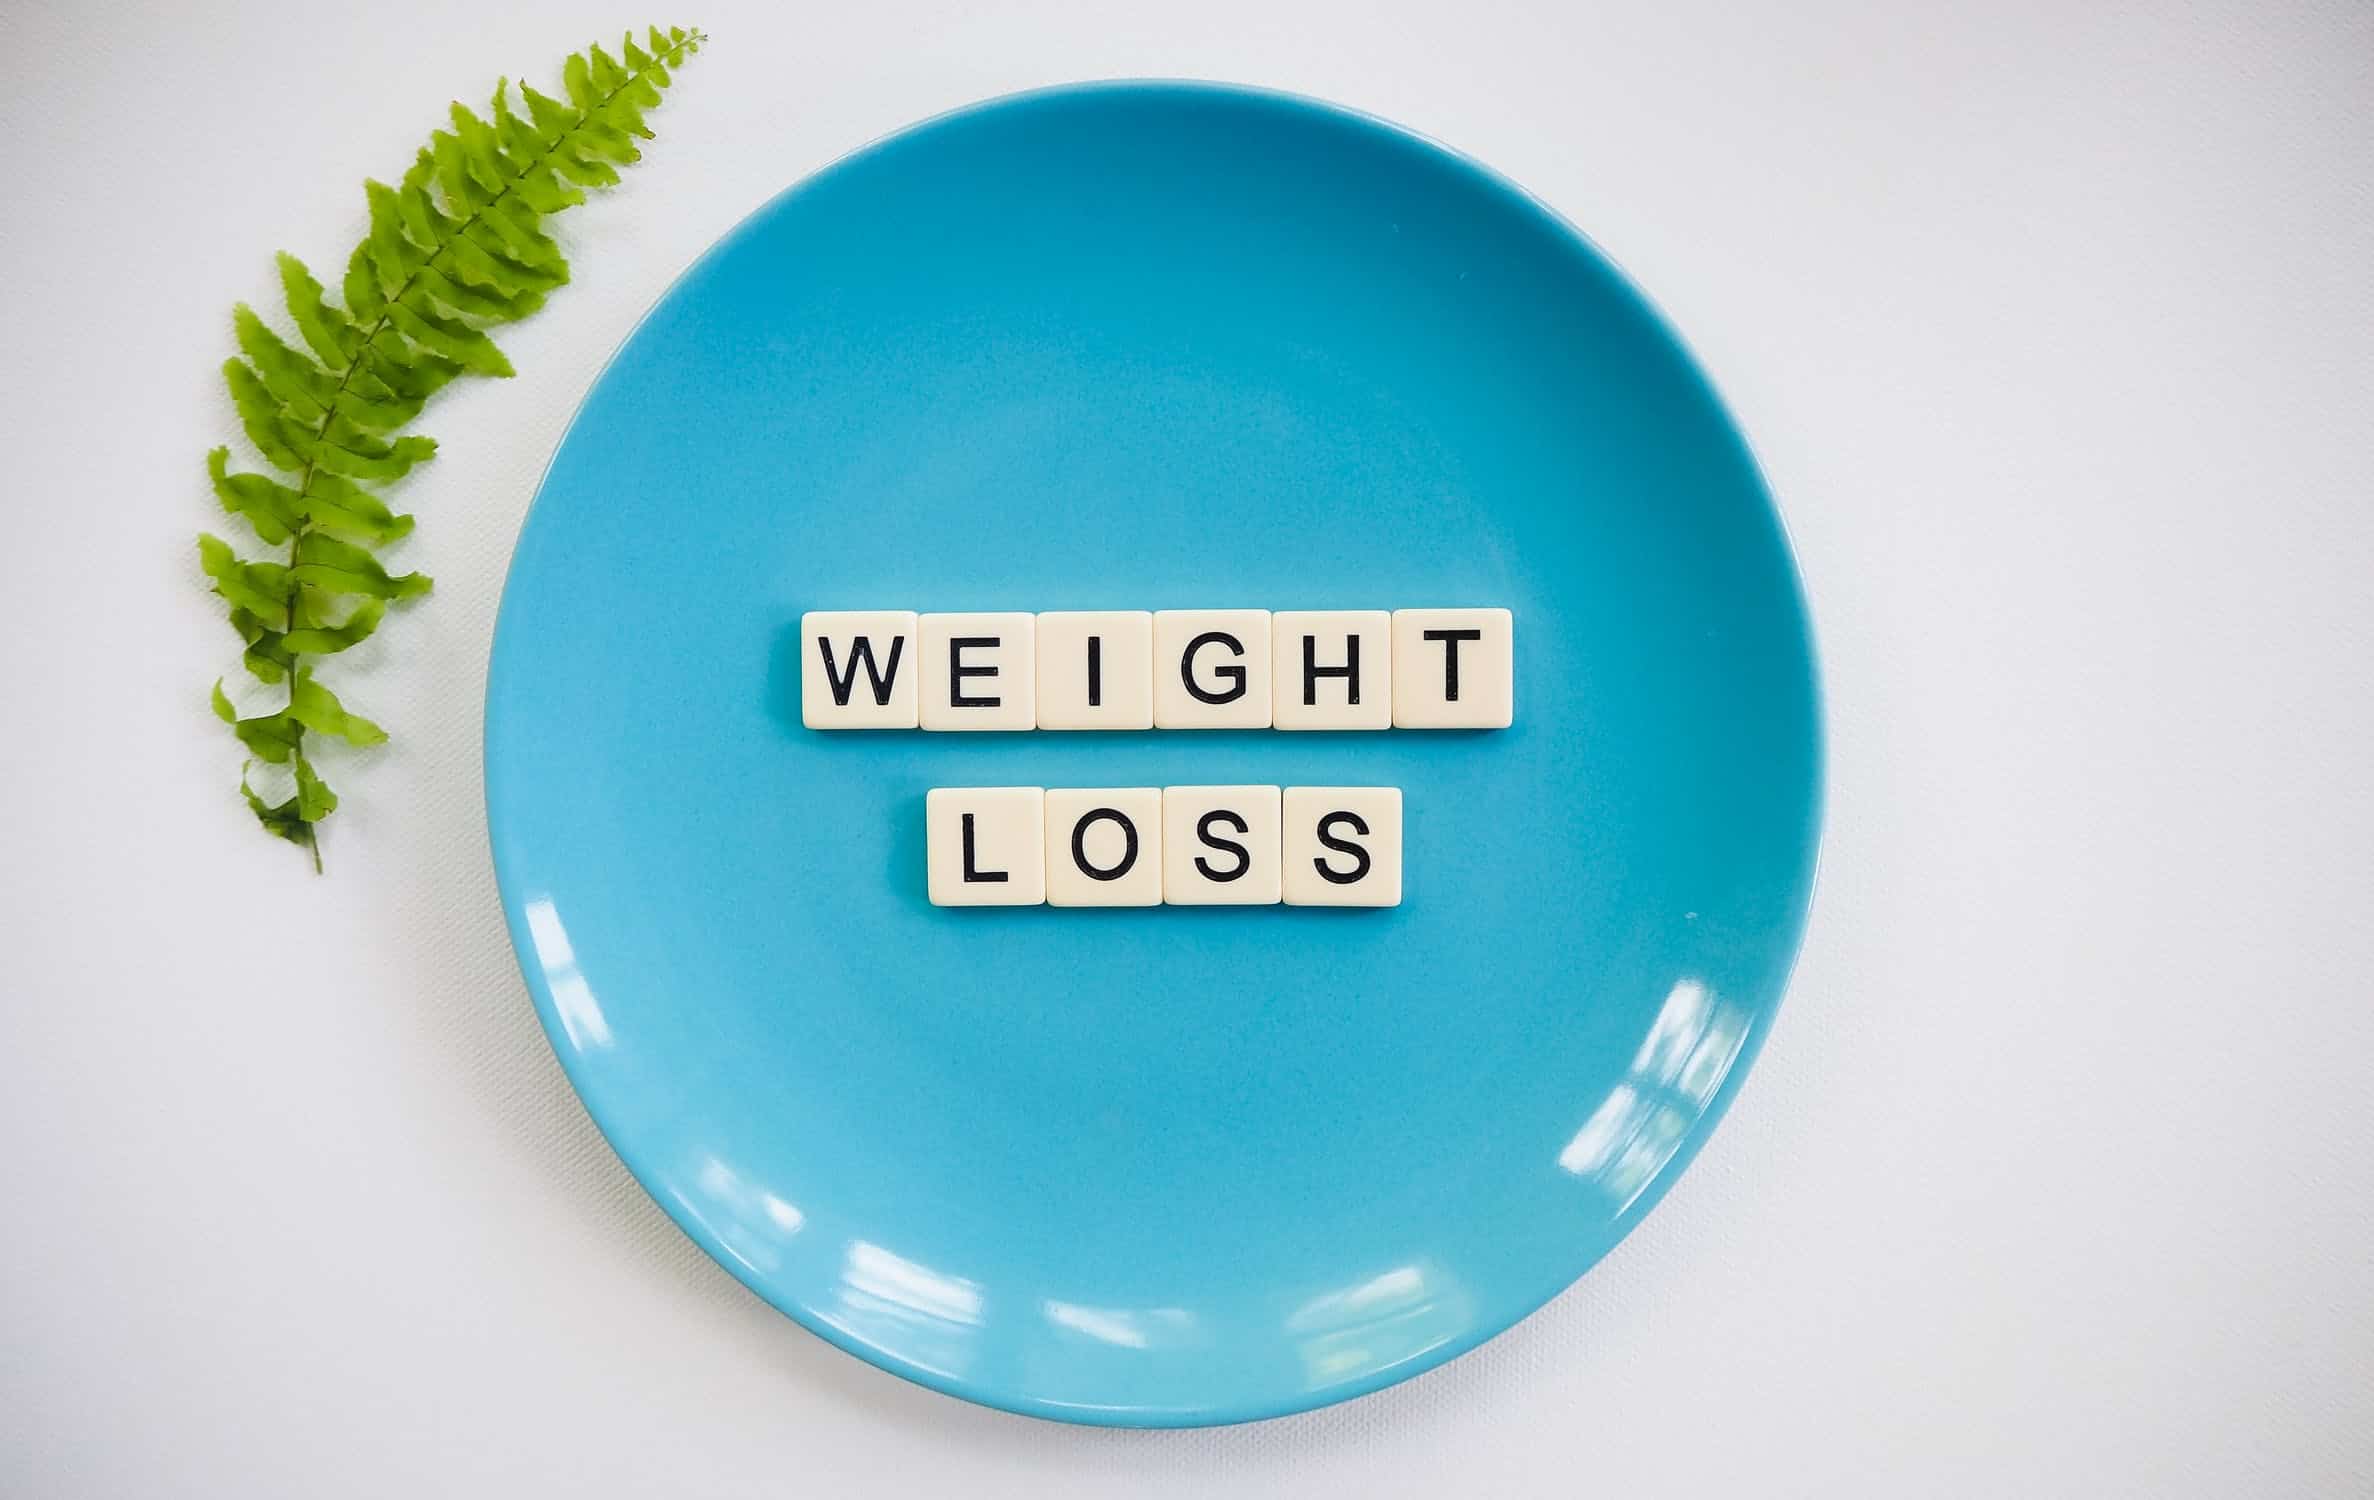 Weight loss plate